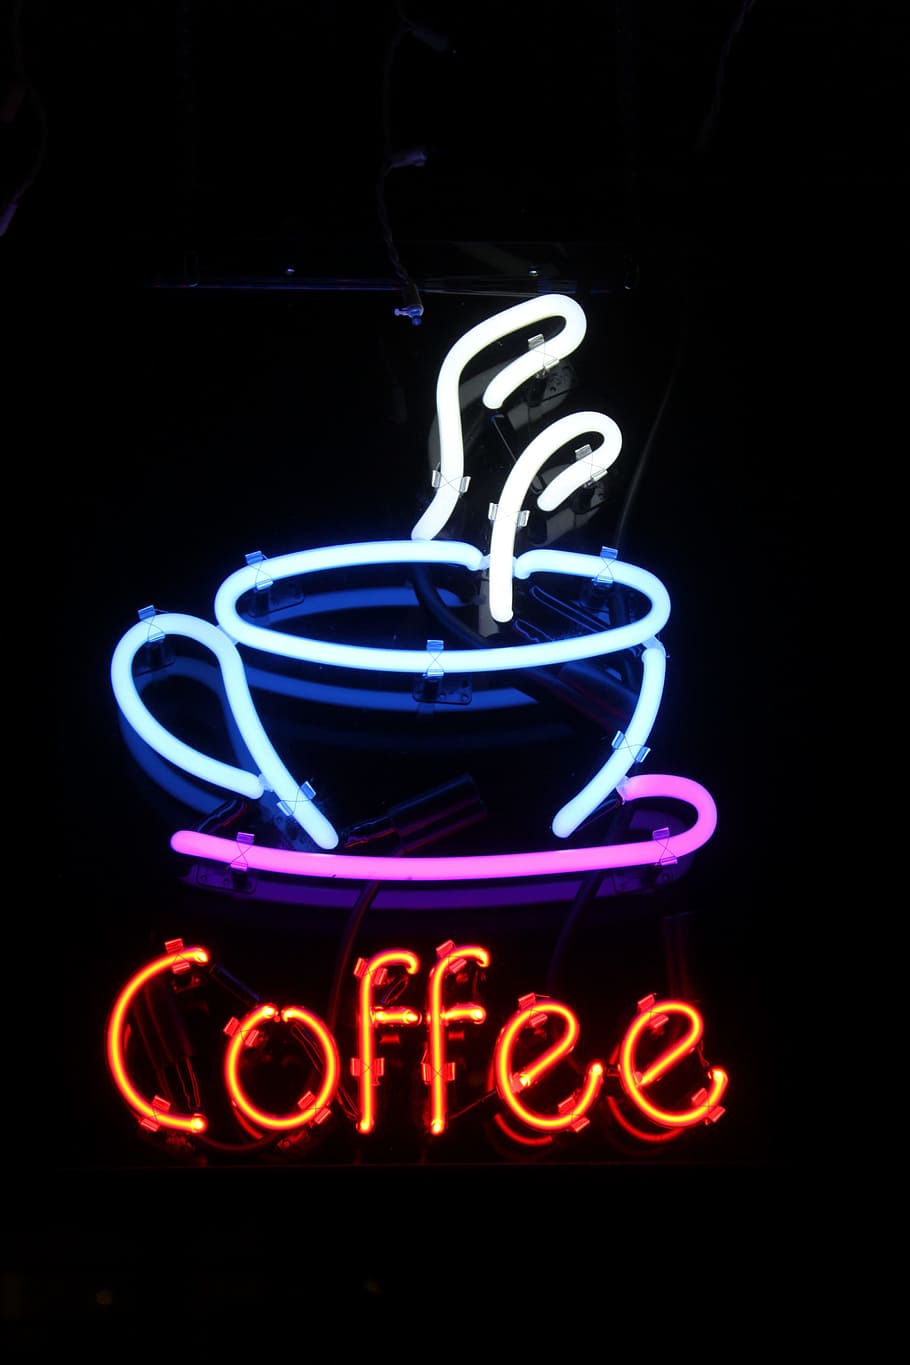 turned-on, blue, multicolored, coffee neon signage, Coffee, neon light, signage, neon, sign, illuminated